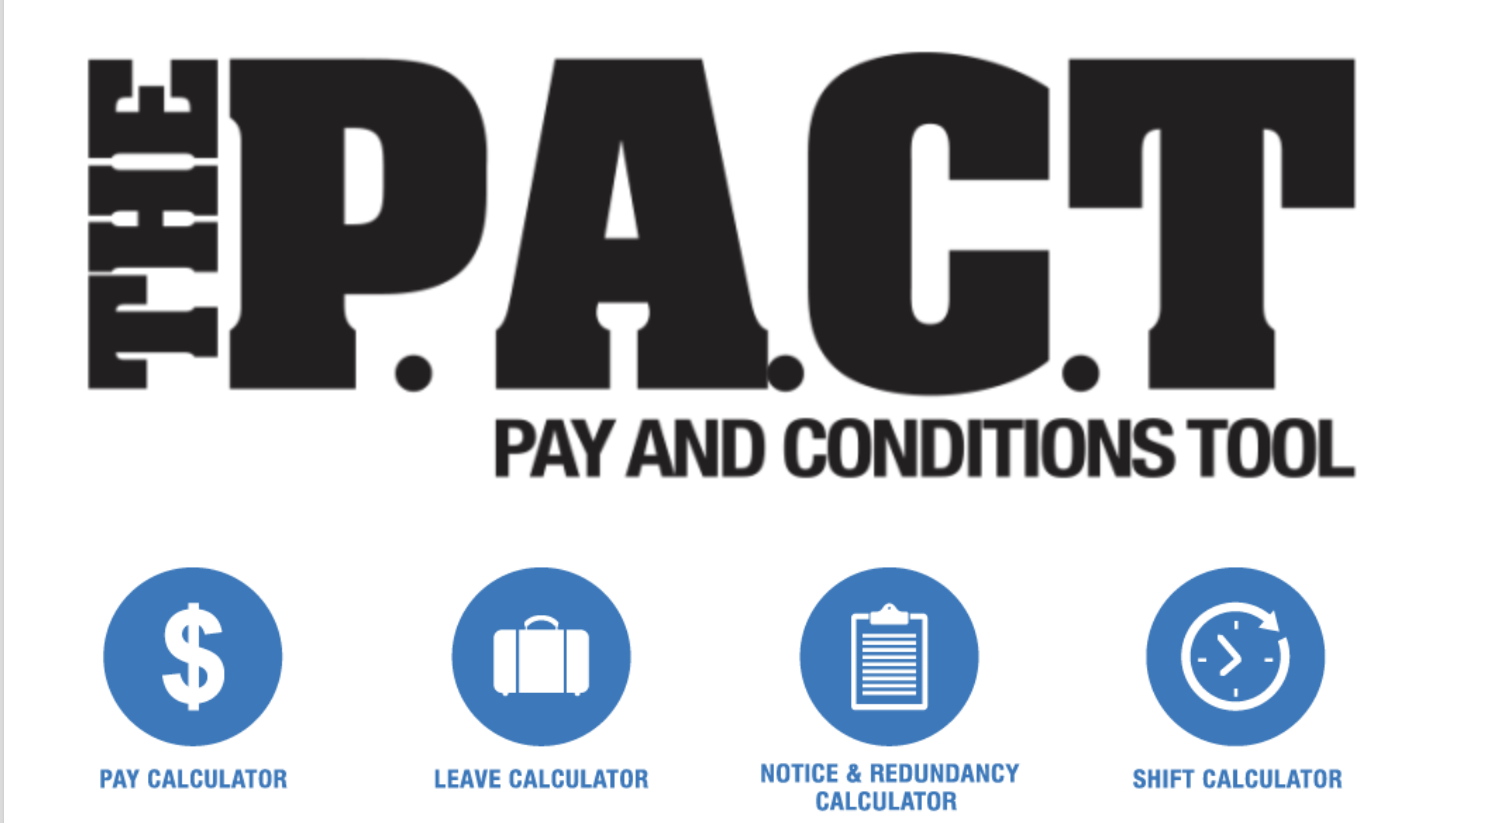 Make Sure You're Getting Paid Correctly With The PACT!